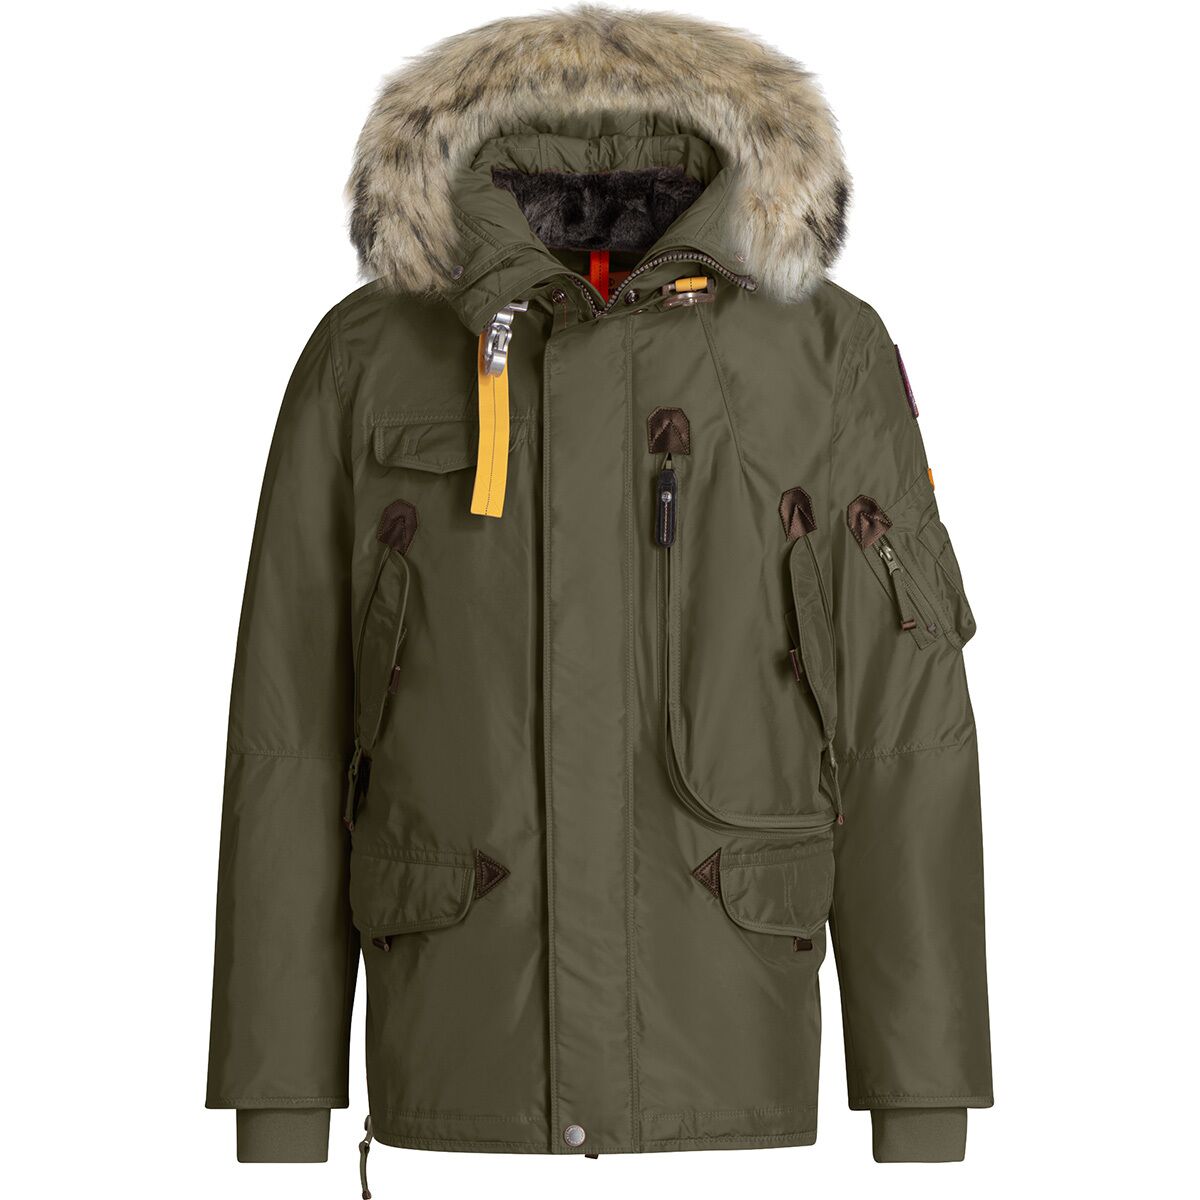 Parajumpers Right Hand Jacket - Men's | Backcountry.com